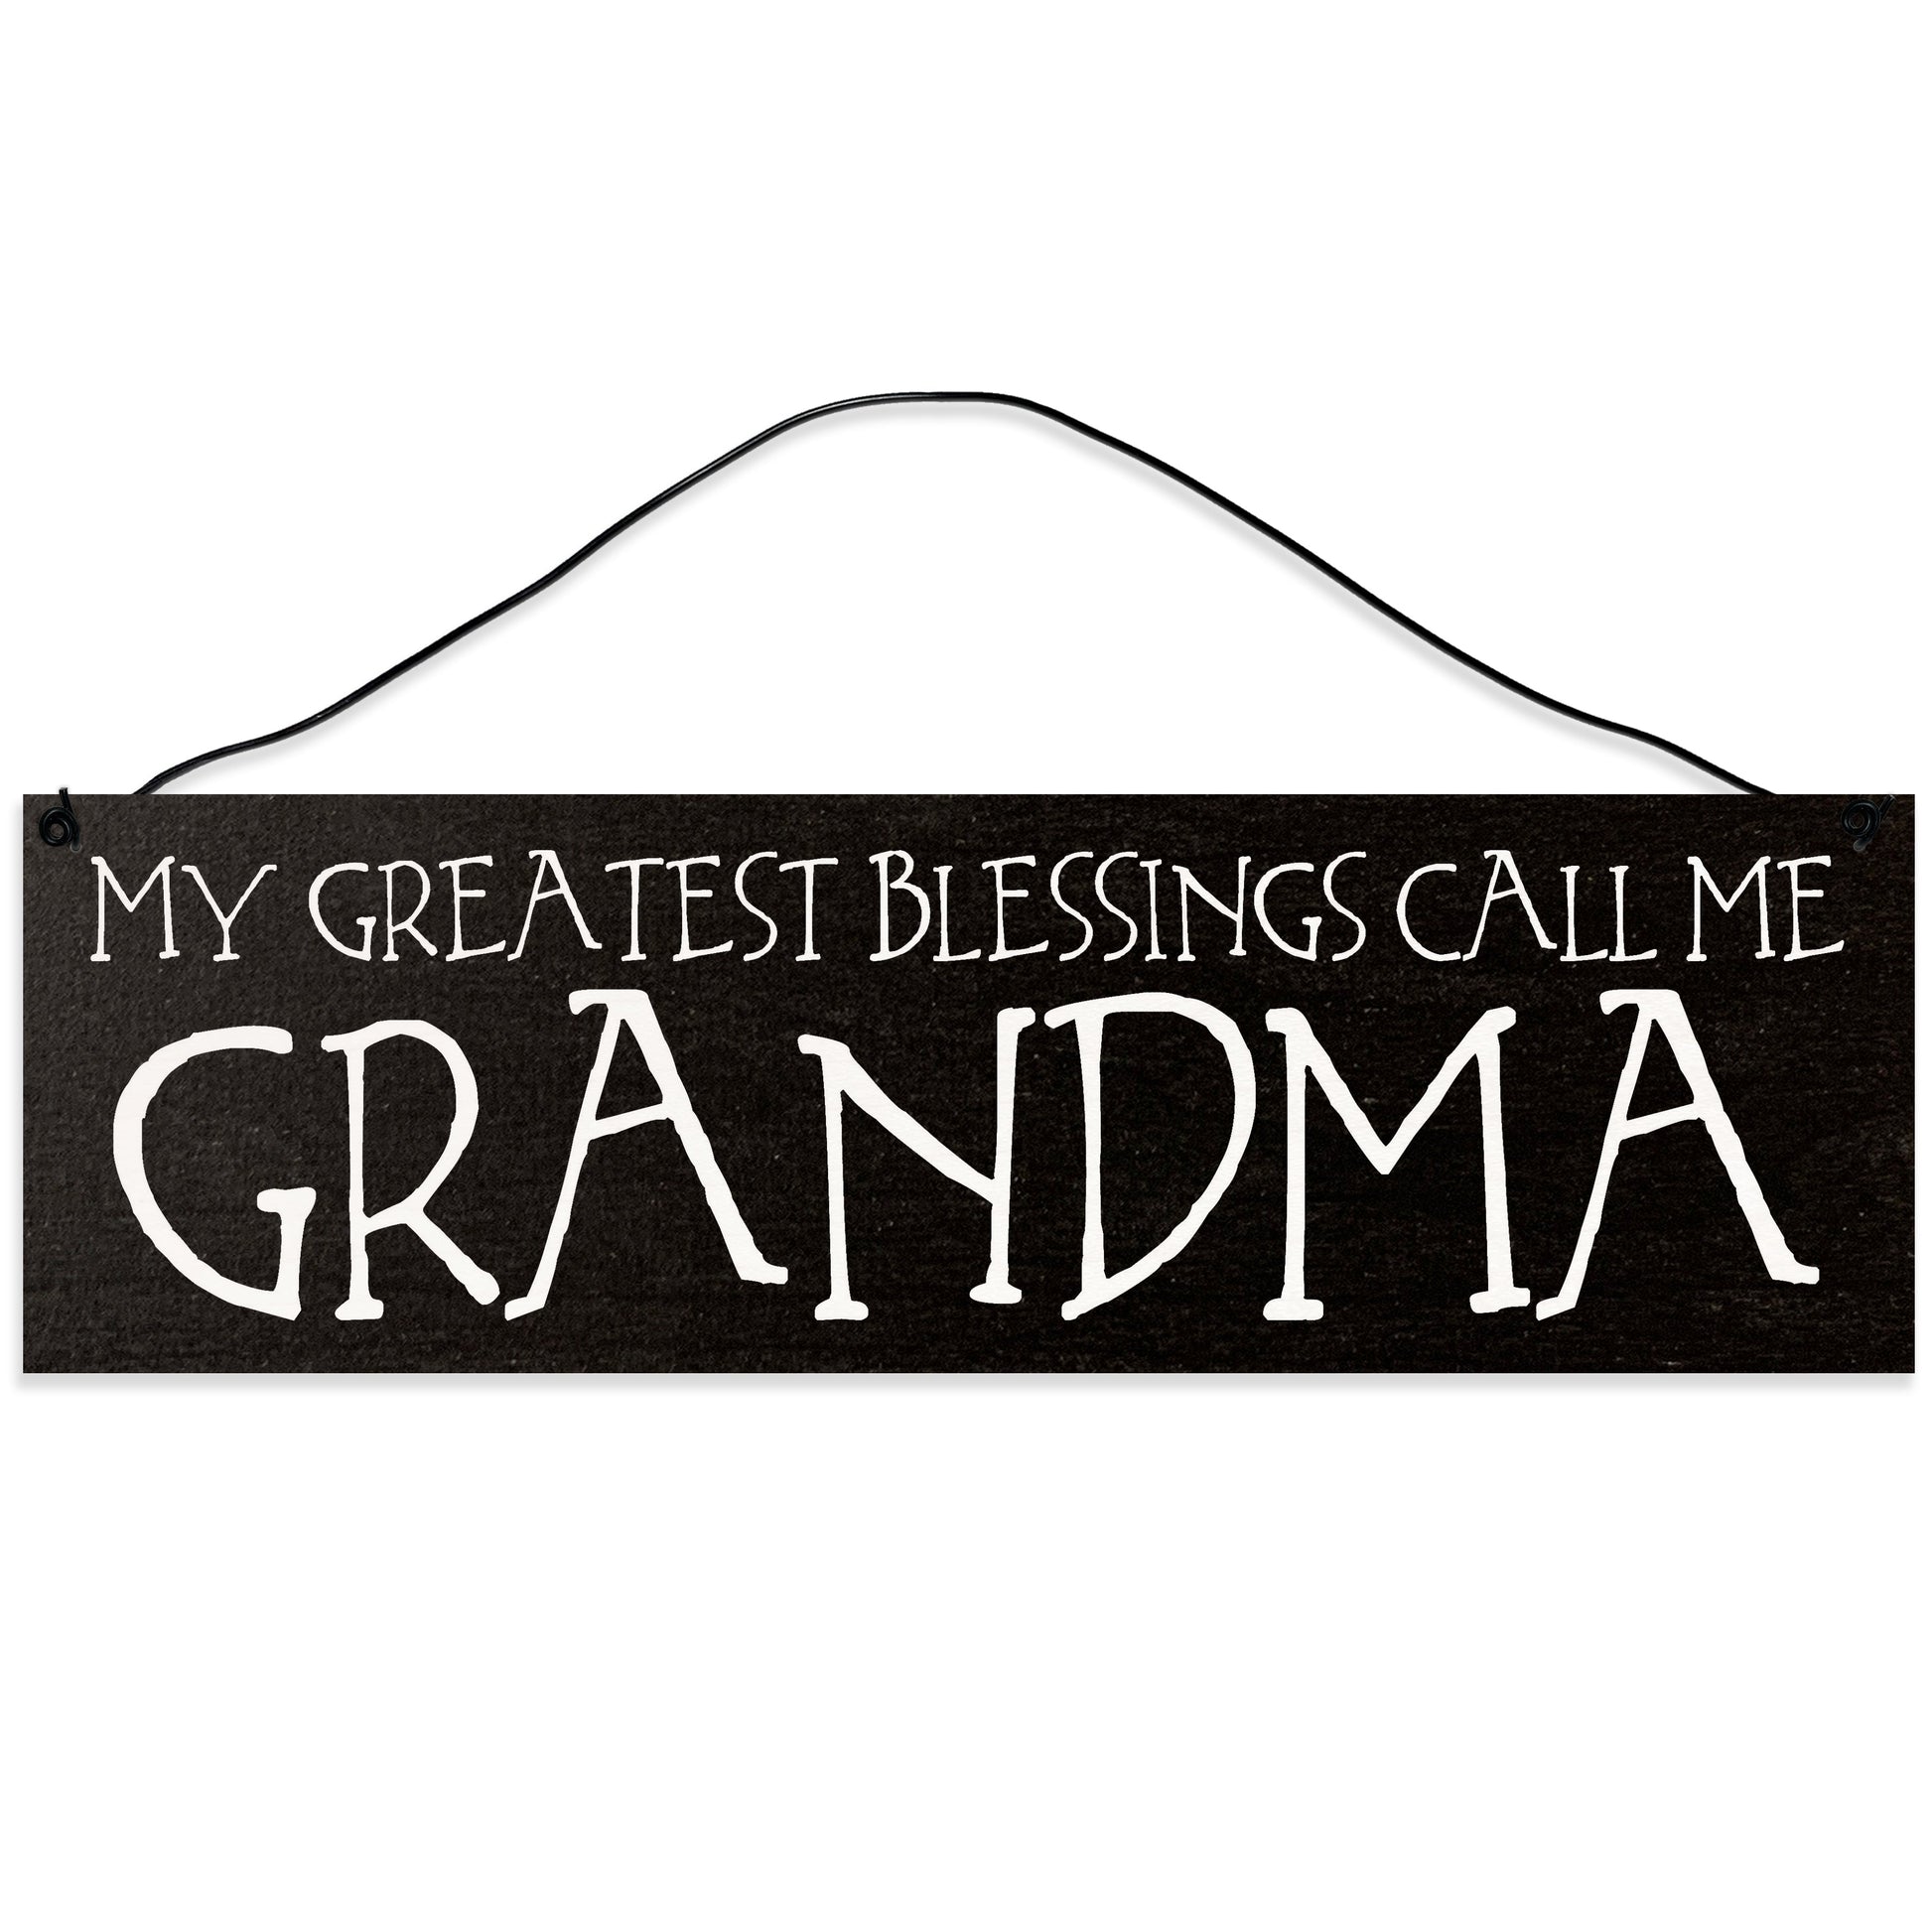 Sawyer's Mill - My Greatest Blessings Call Me Grandma. Wood Sign for Home or Office. Measures 3x10 inches.